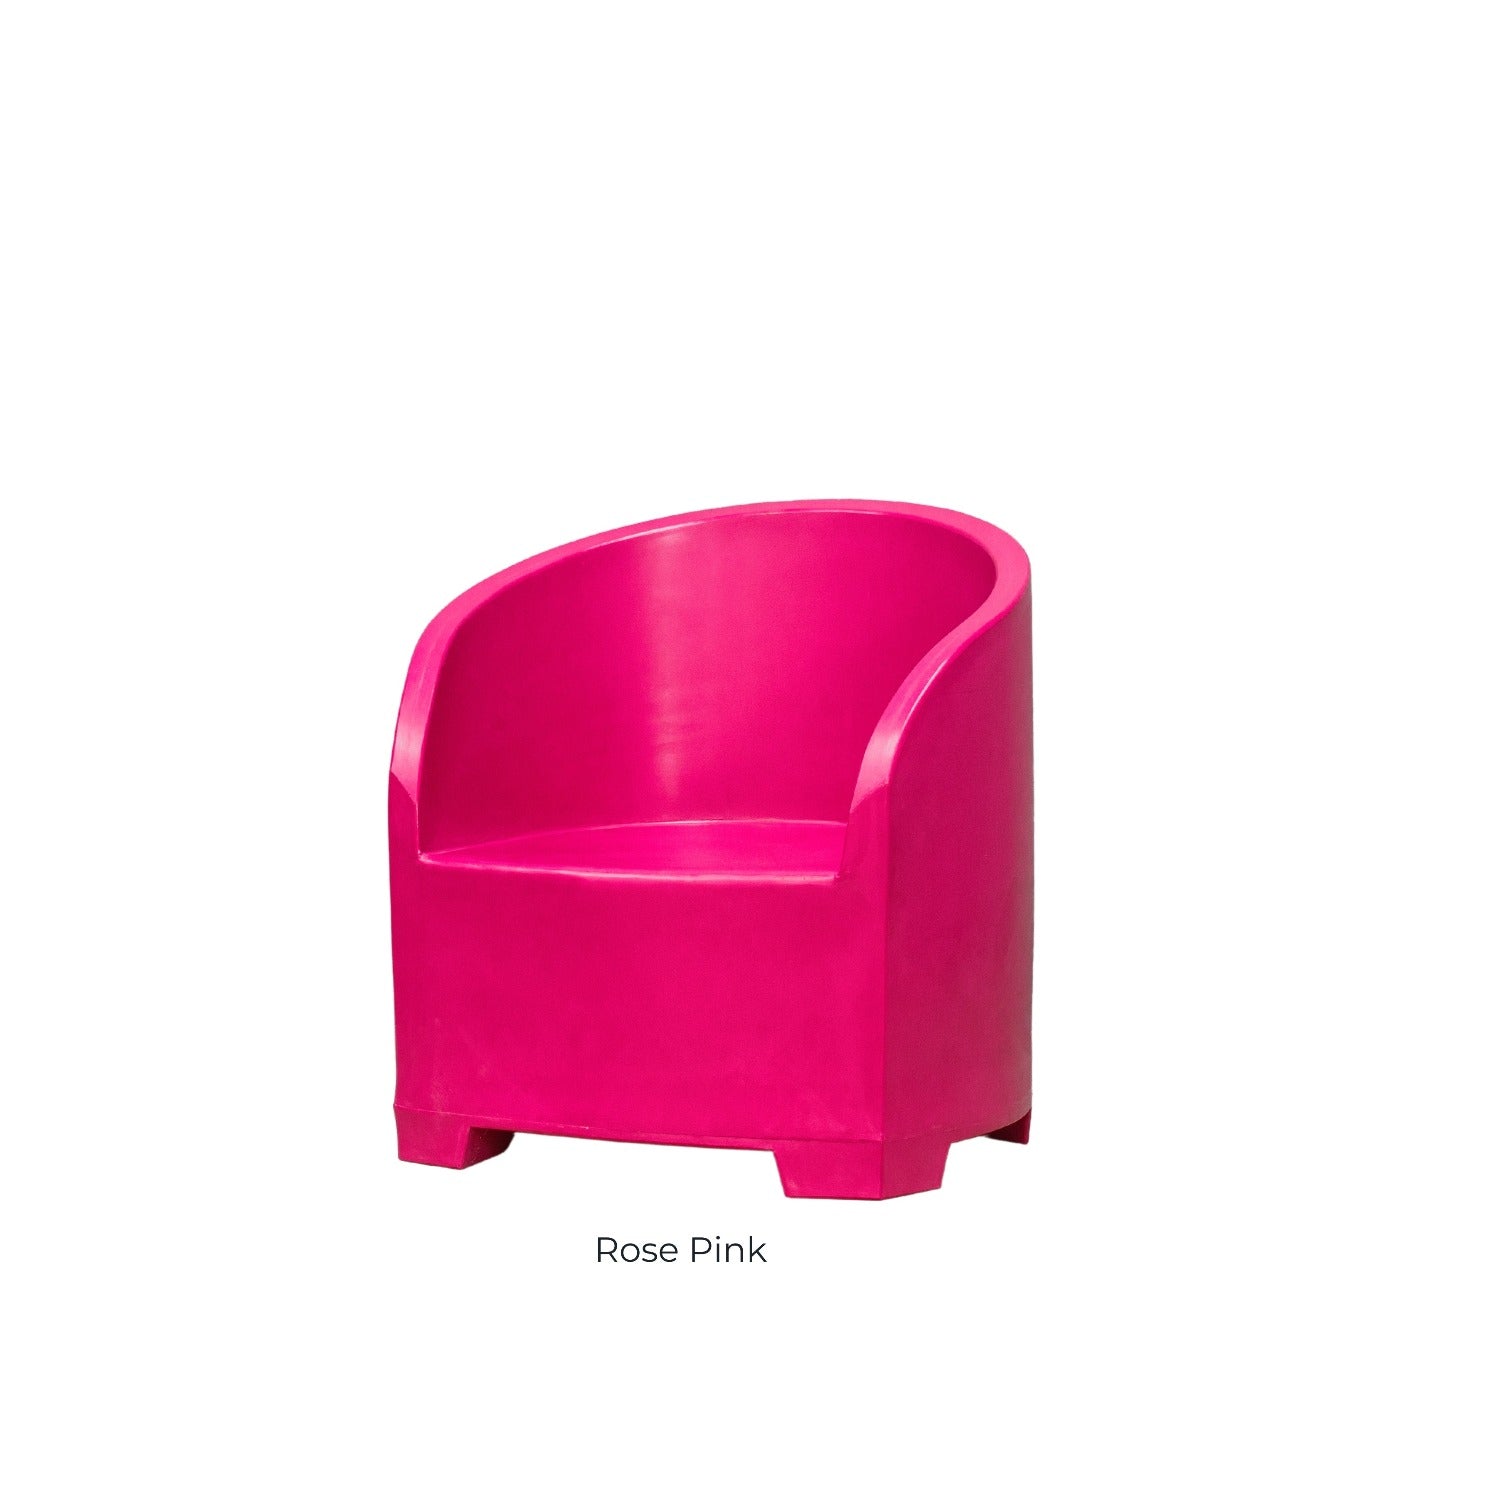 A pink outdoor chair made by Modscene NZ.